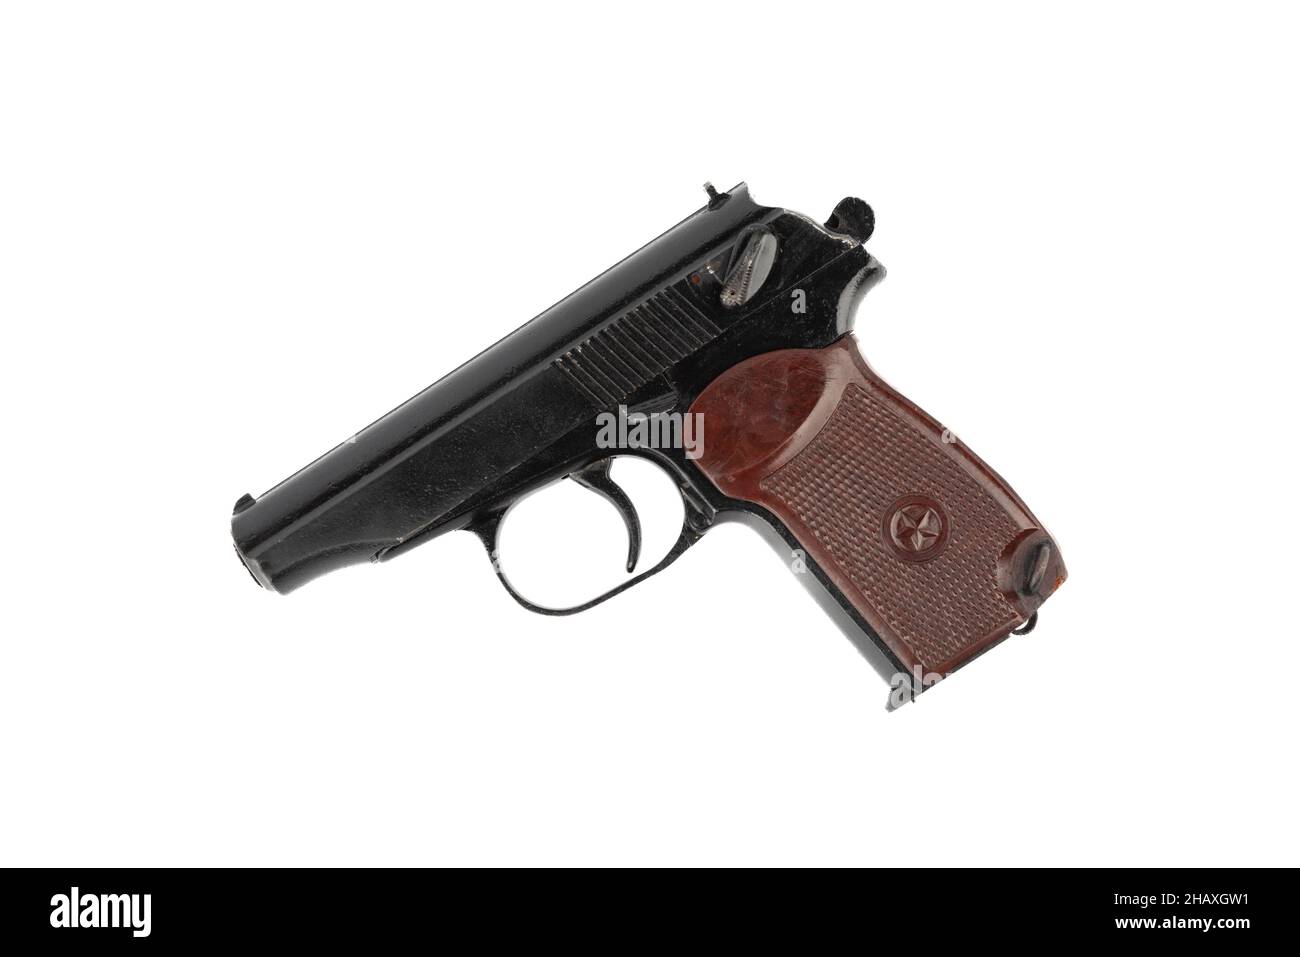 Top view of an old Makarov pistol. Copy space. Stock Photo